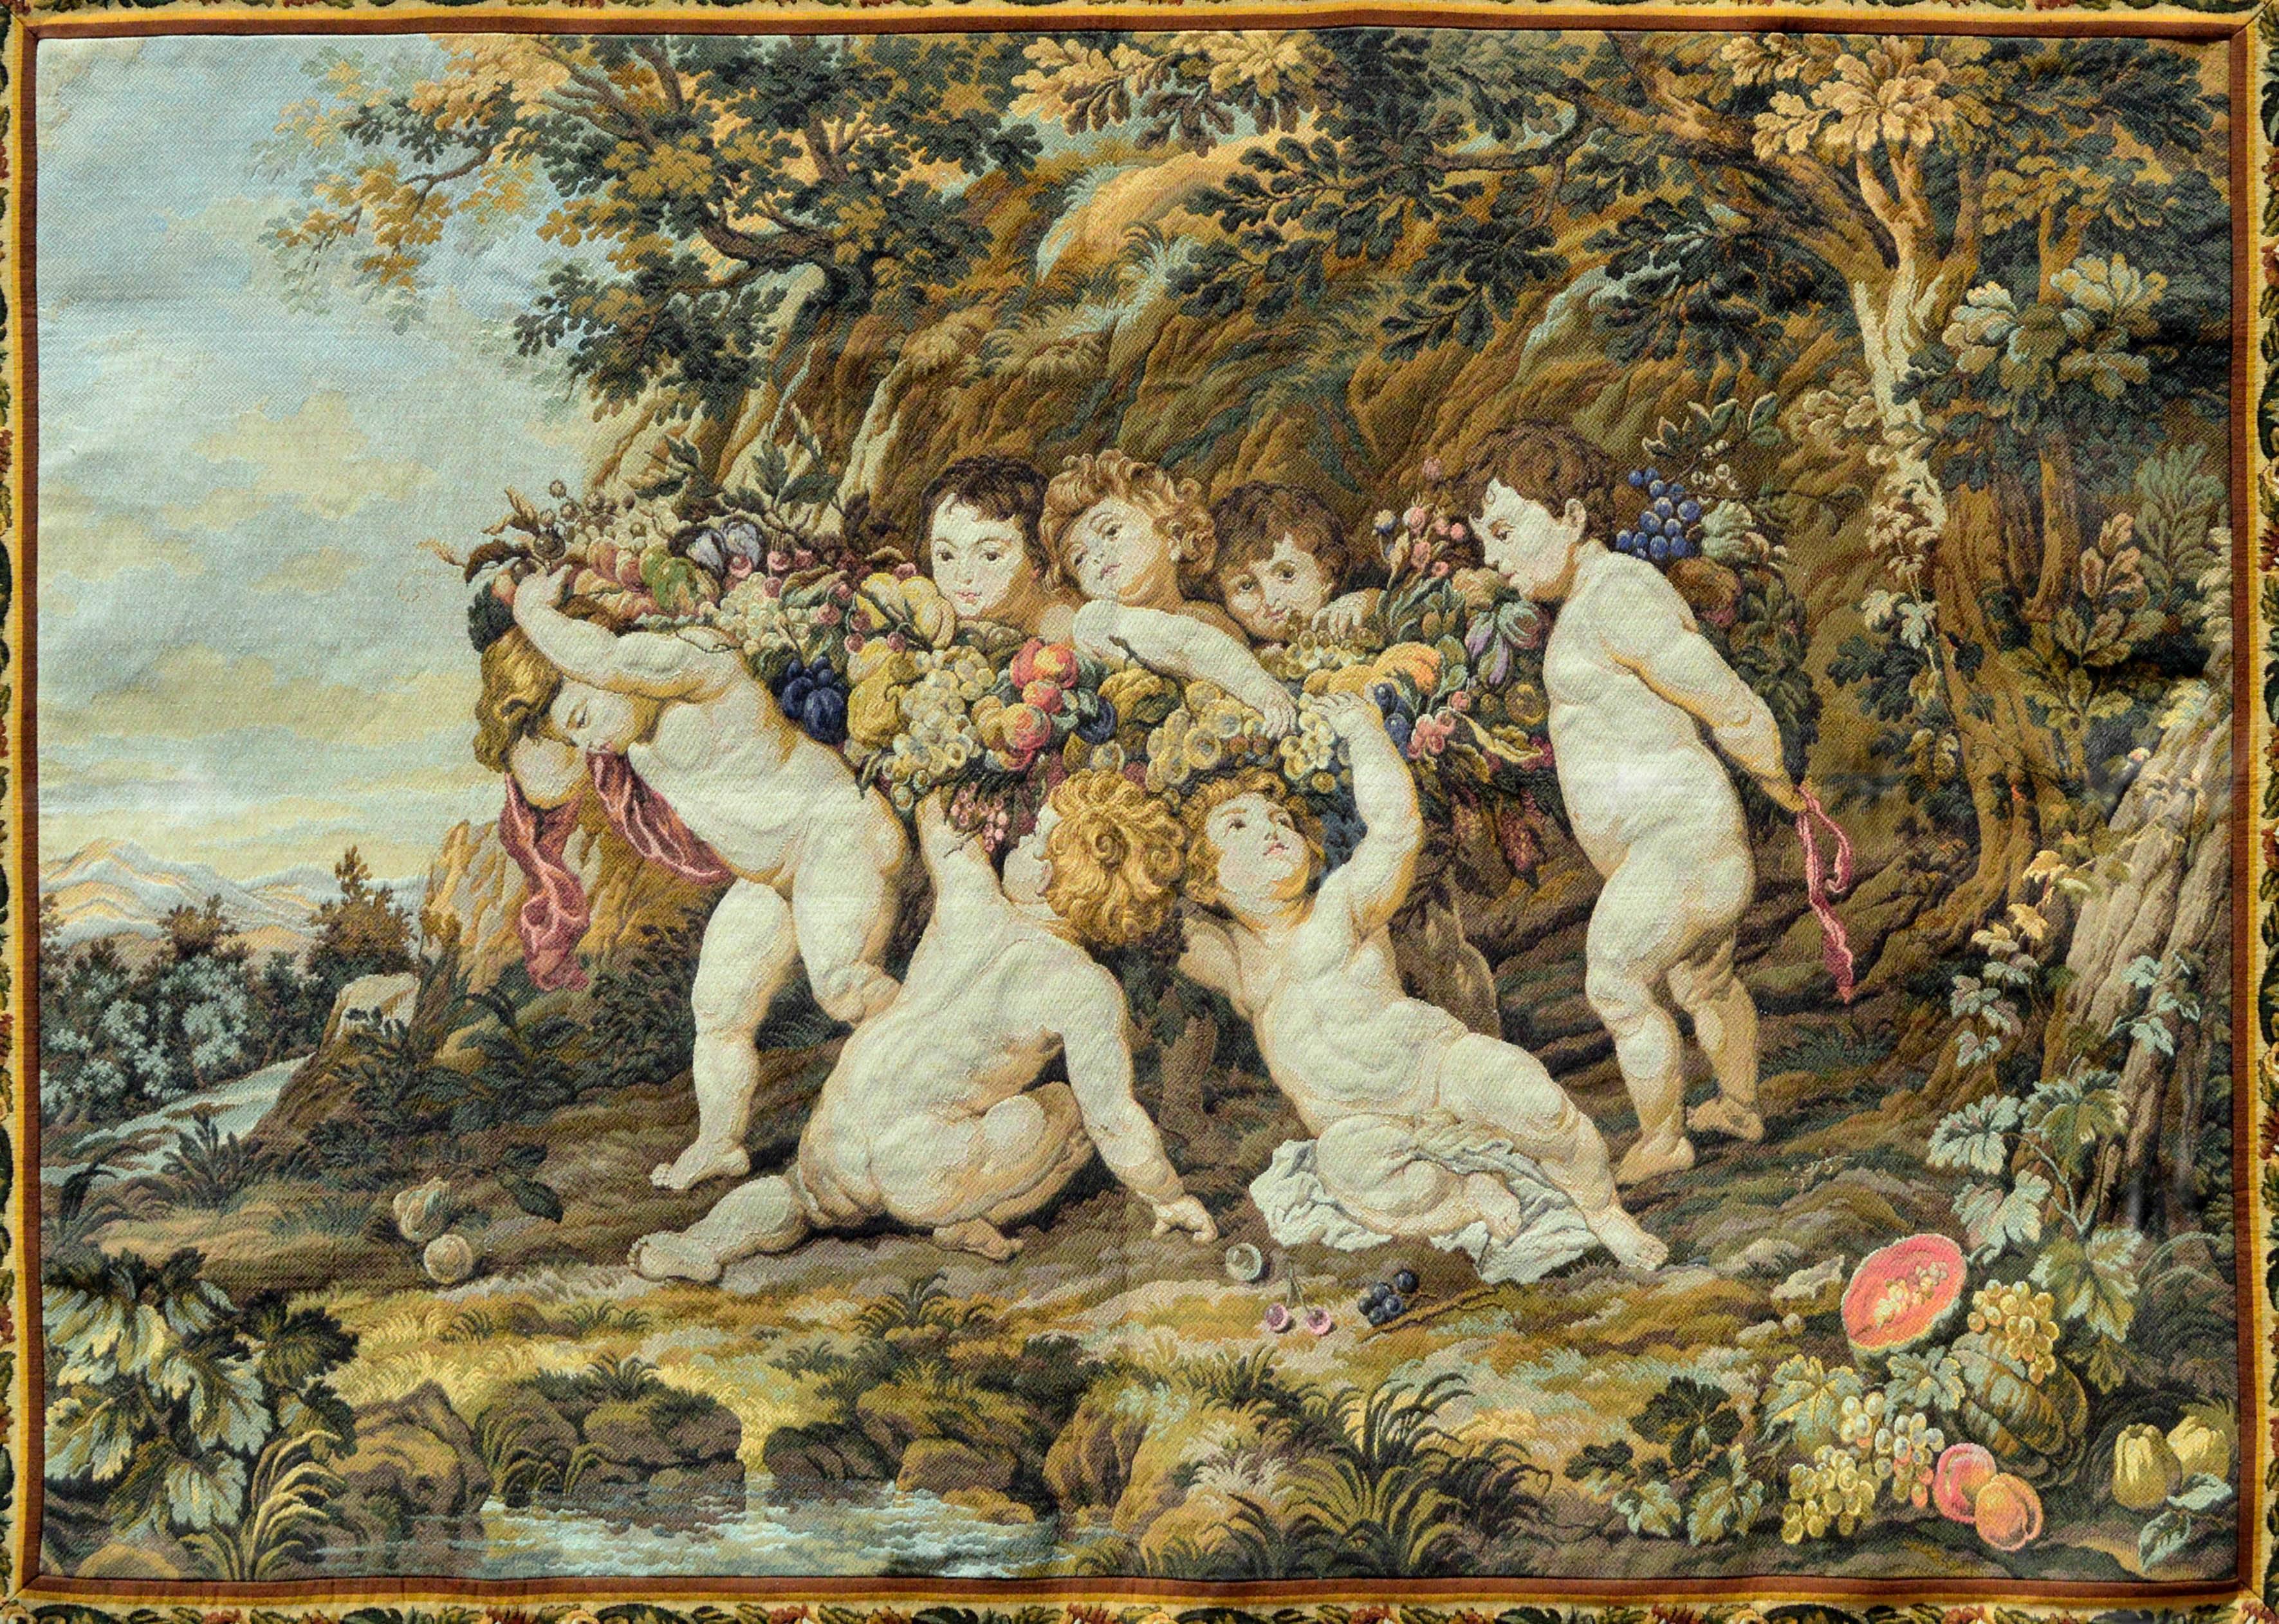 Charming old world Rococo style wall tapestry of cherubs in the style of Boucher by Paris company Panneaux Gobelins. Woven in warm rustic colors with blues, greens, orange, reds and golds depicting harvest party. Could be used as a table topper too.